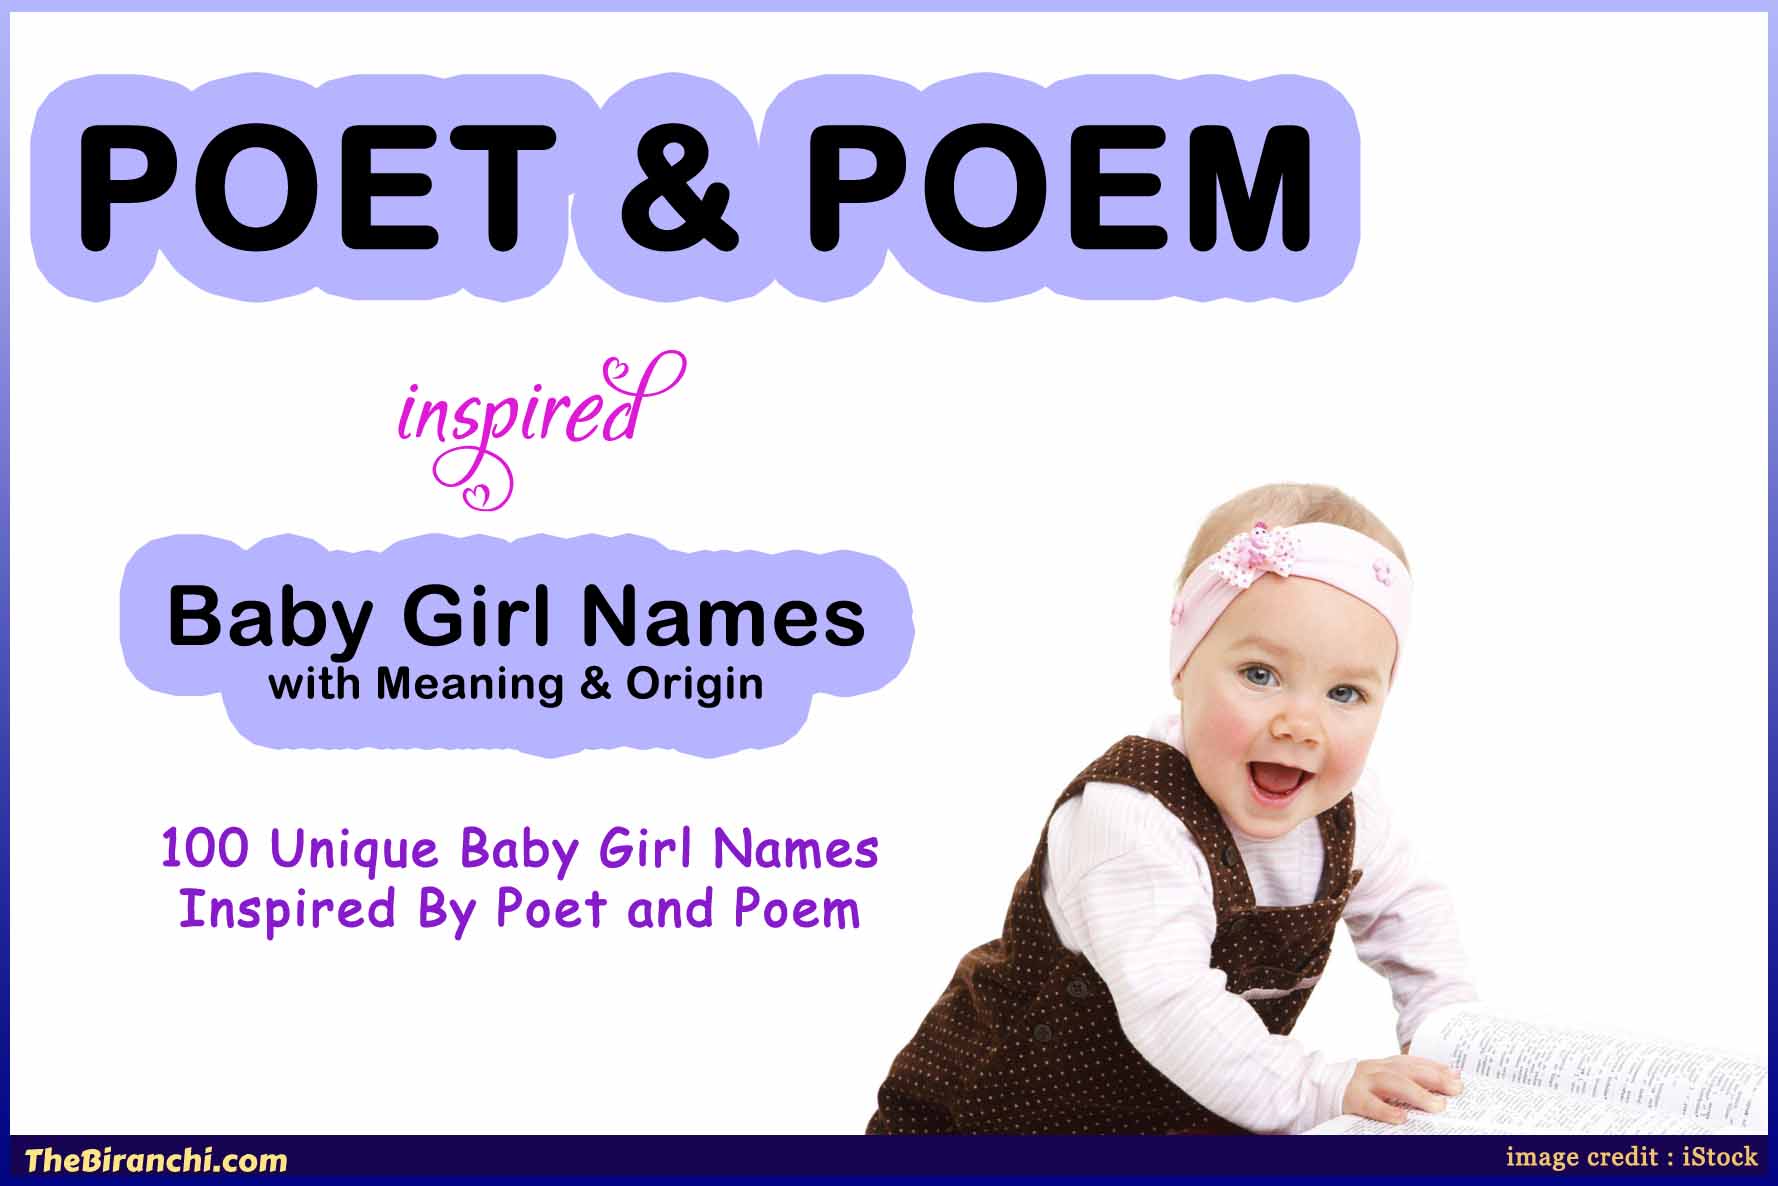 100 Unique Baby Girl Names Inspired By Poet and Poem